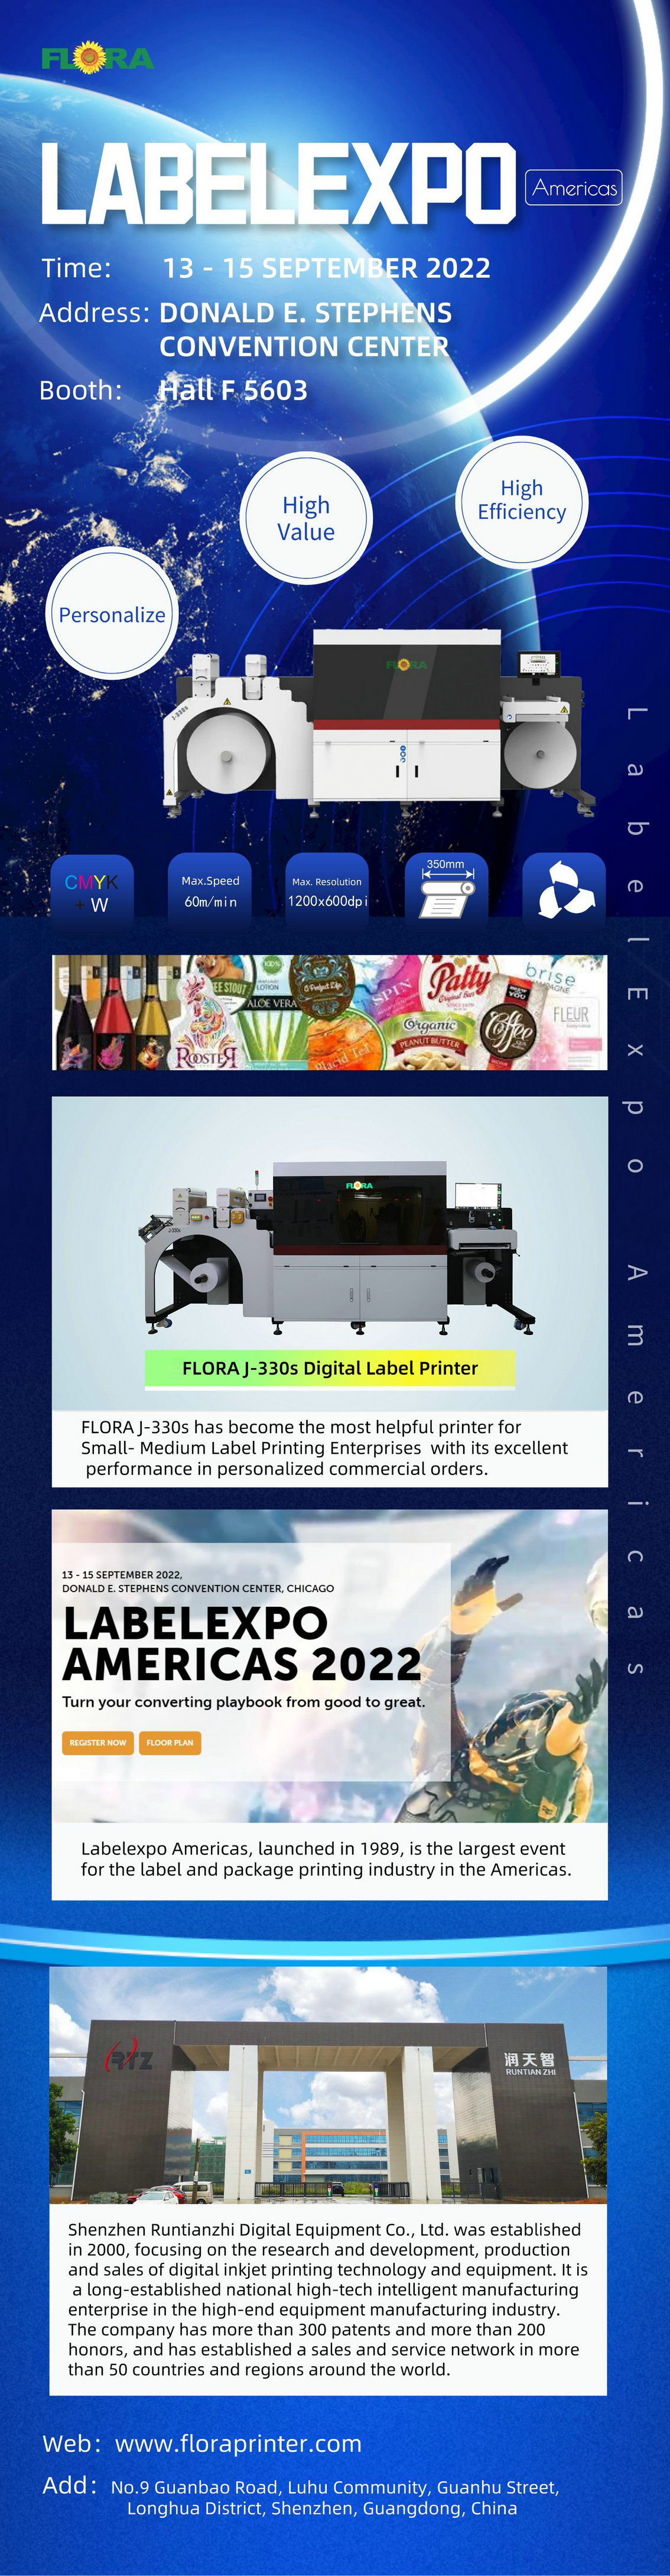 FLORA| Meet you at LabelExpo Americas 2022